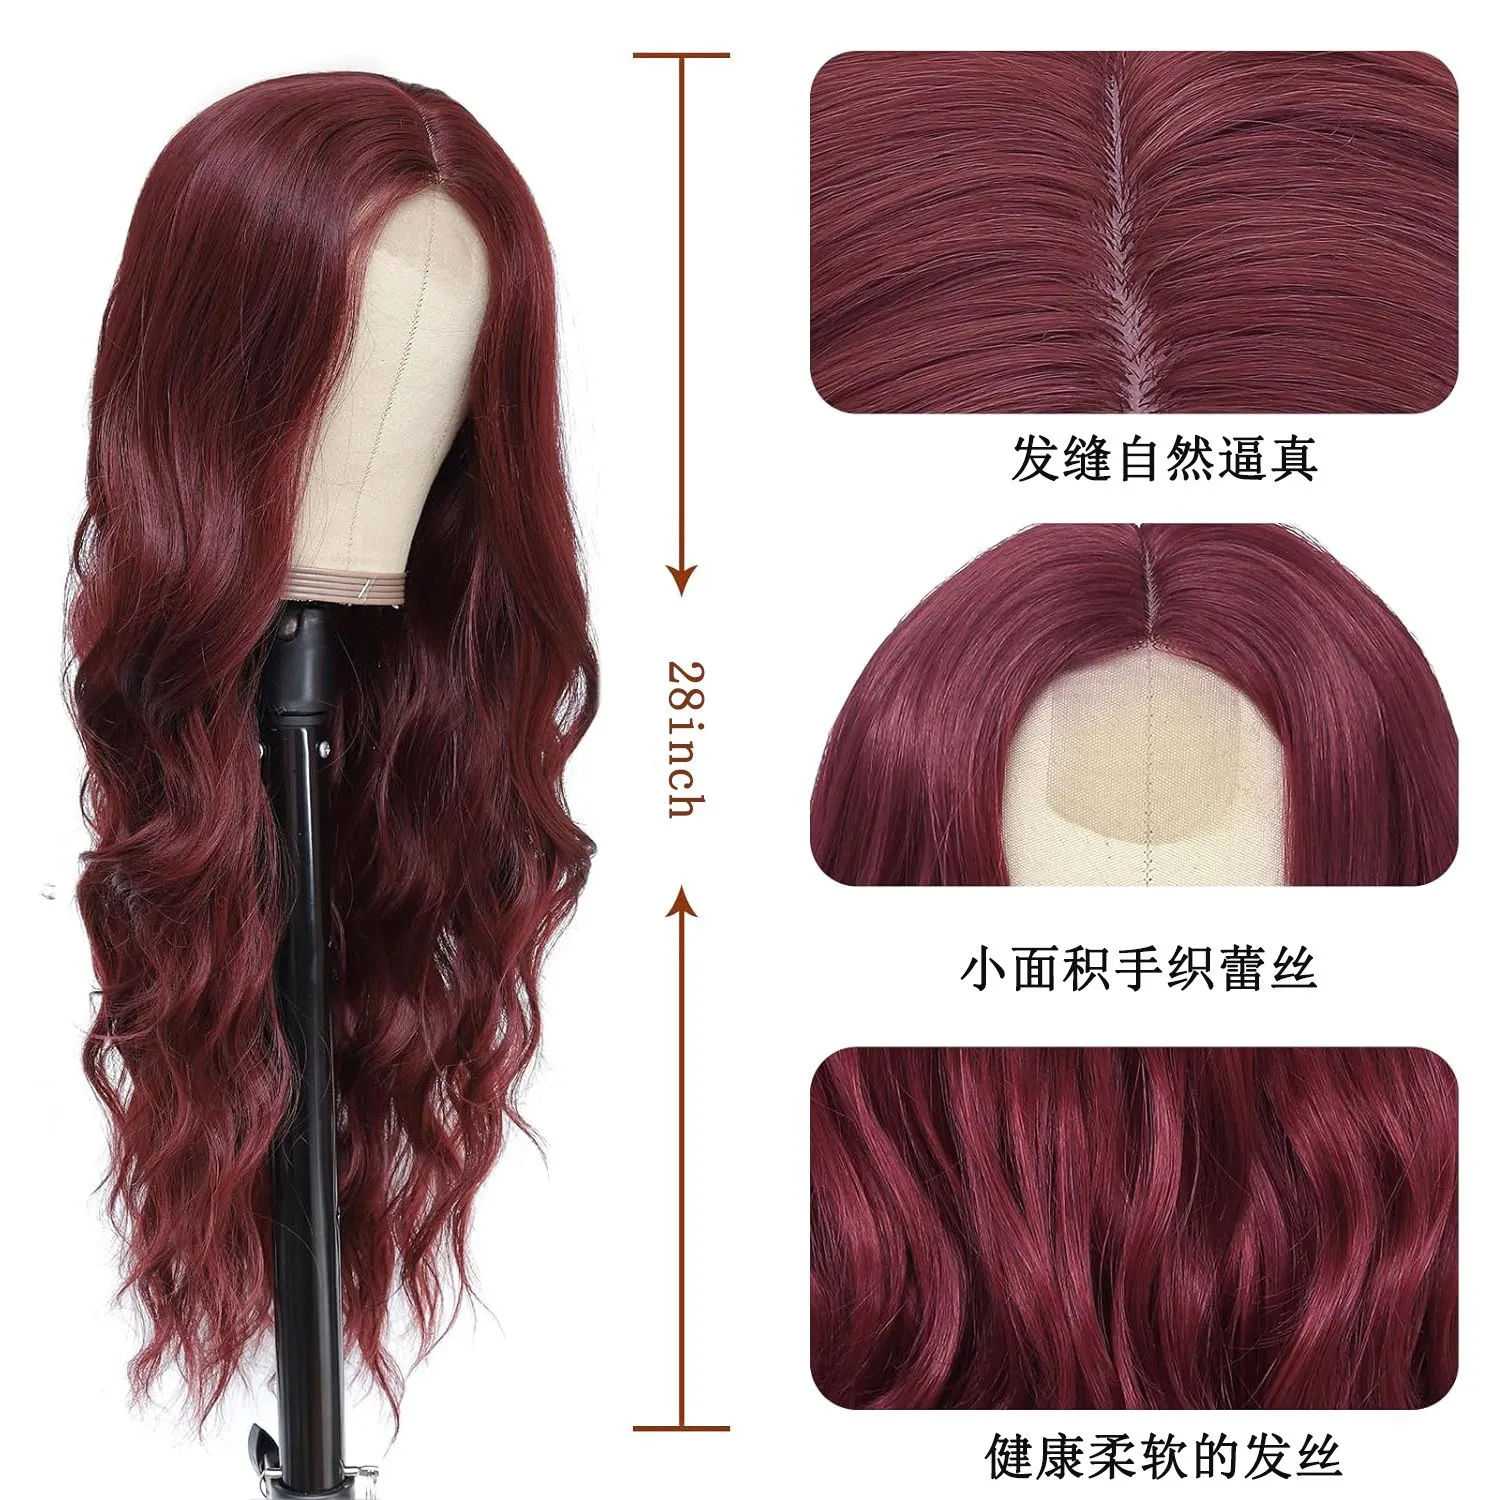 Wholesale Prices Premier Highlight Color Virgin Hair Natural Wave 360 Lace Wig Human Hair Frontal Wig With Baby Hair fast ship